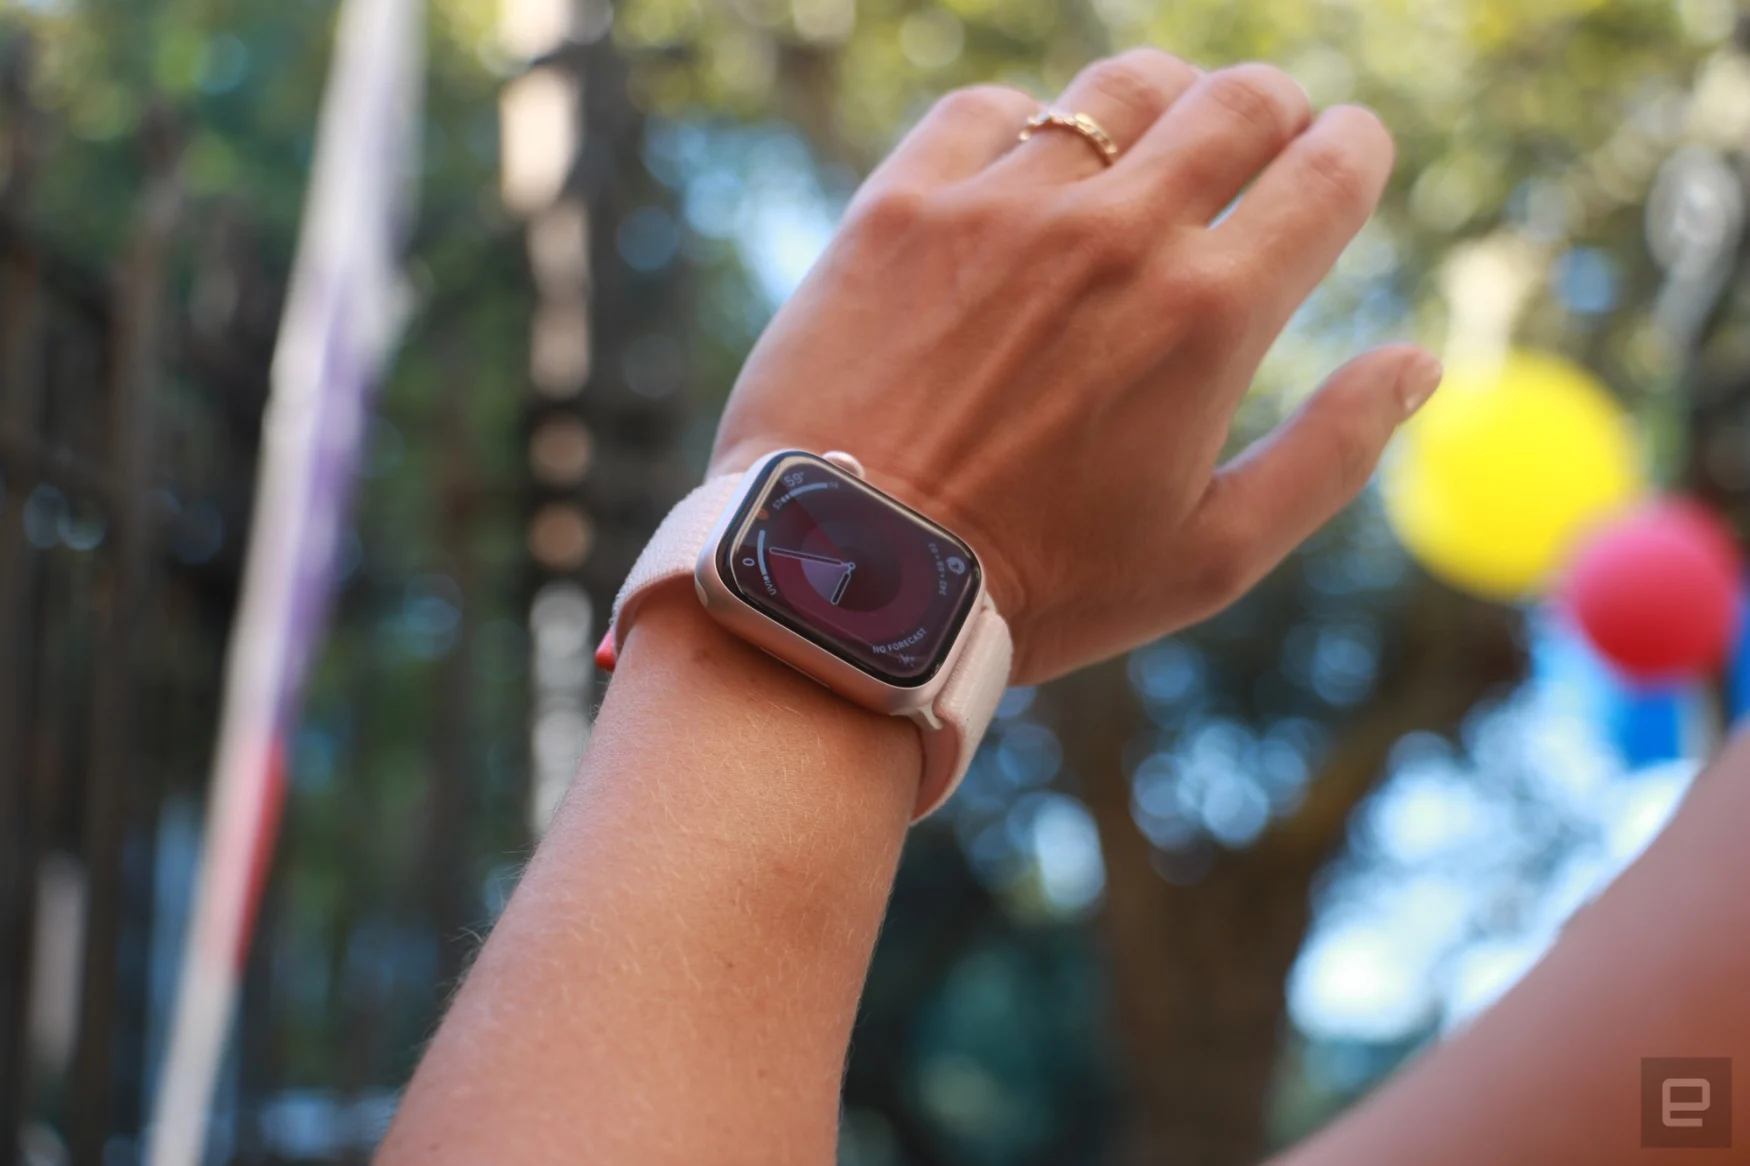 The Apple Watch Series 9 on a wrist in mid-air, with some balloons in the blurred background.